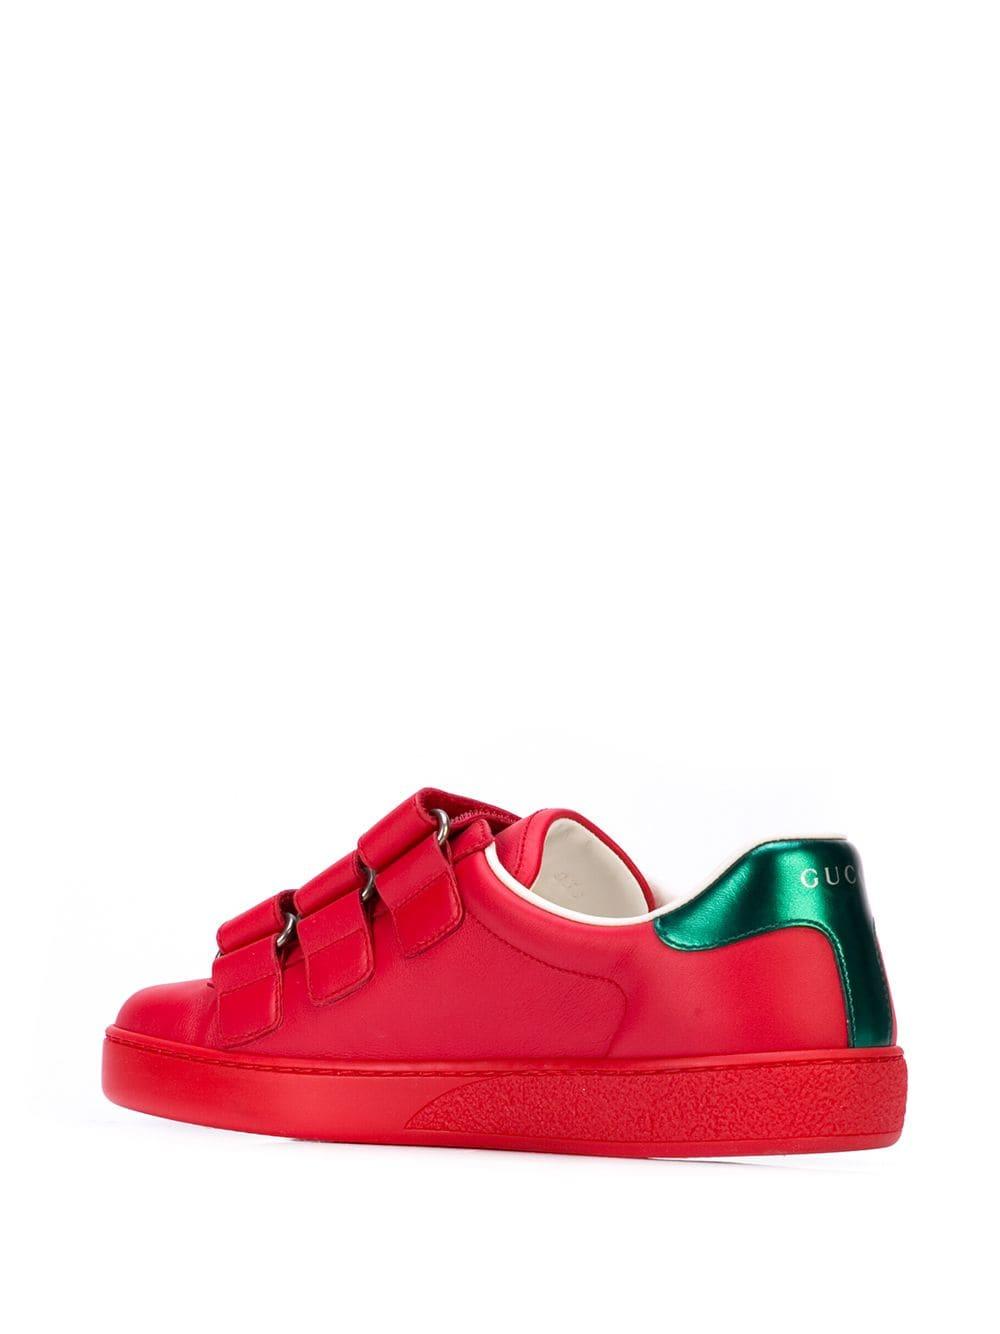 G blæk Astrolabe Gucci Leather Rainbow Sneakers in Red for Men - Lyst